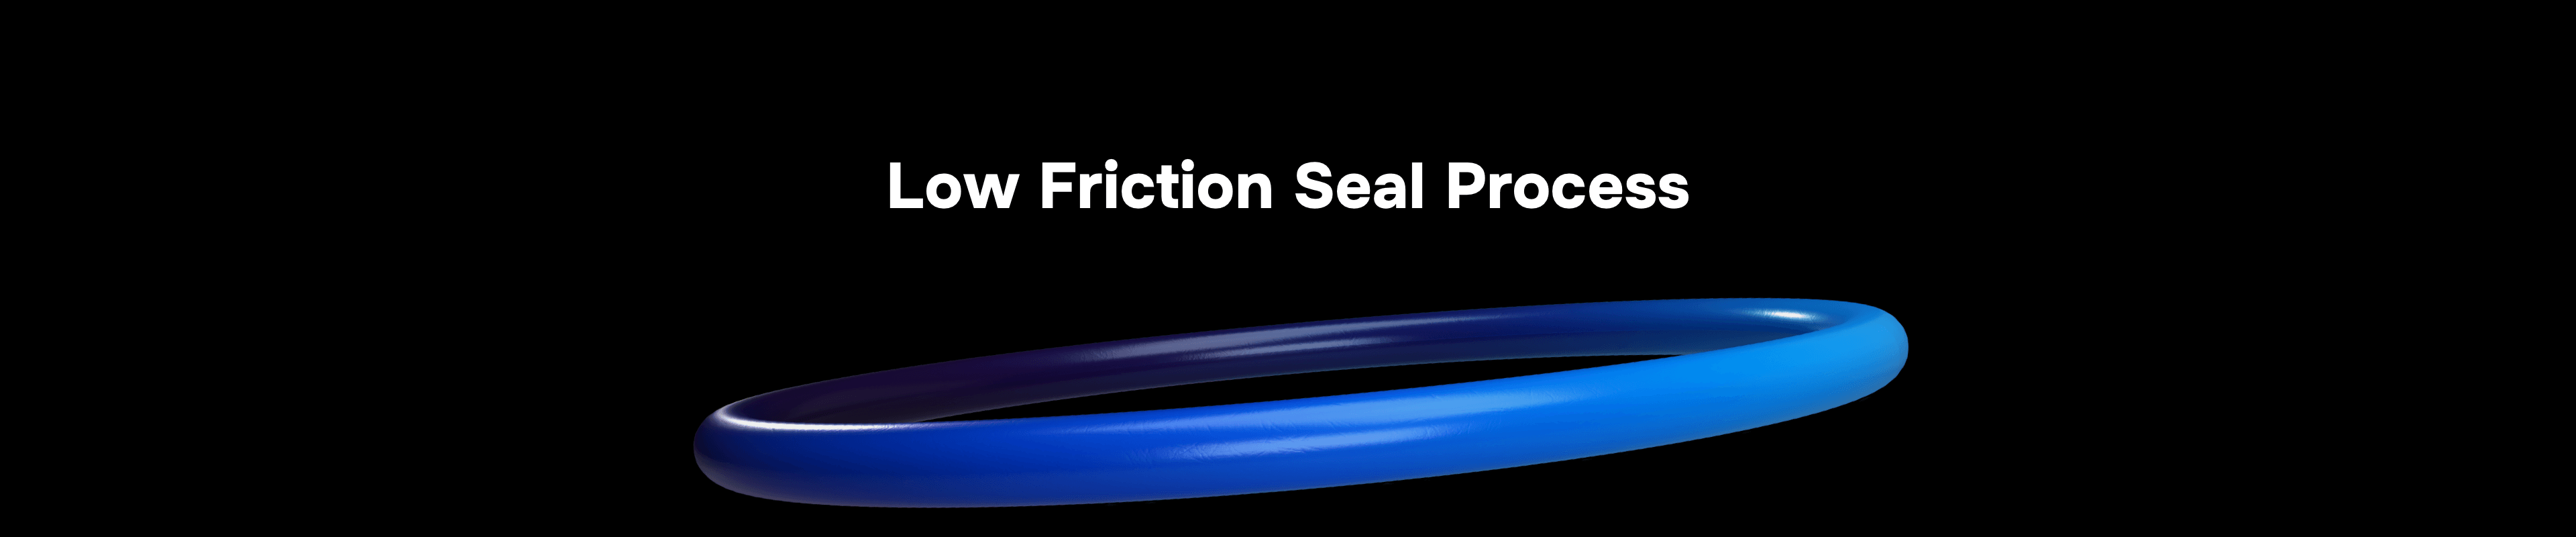 PolyMod Technologies' Low Friction Seal Process for high performance thermoset and thermoplastic rubber materials. Large graphic of blue gradient o-ring seal.